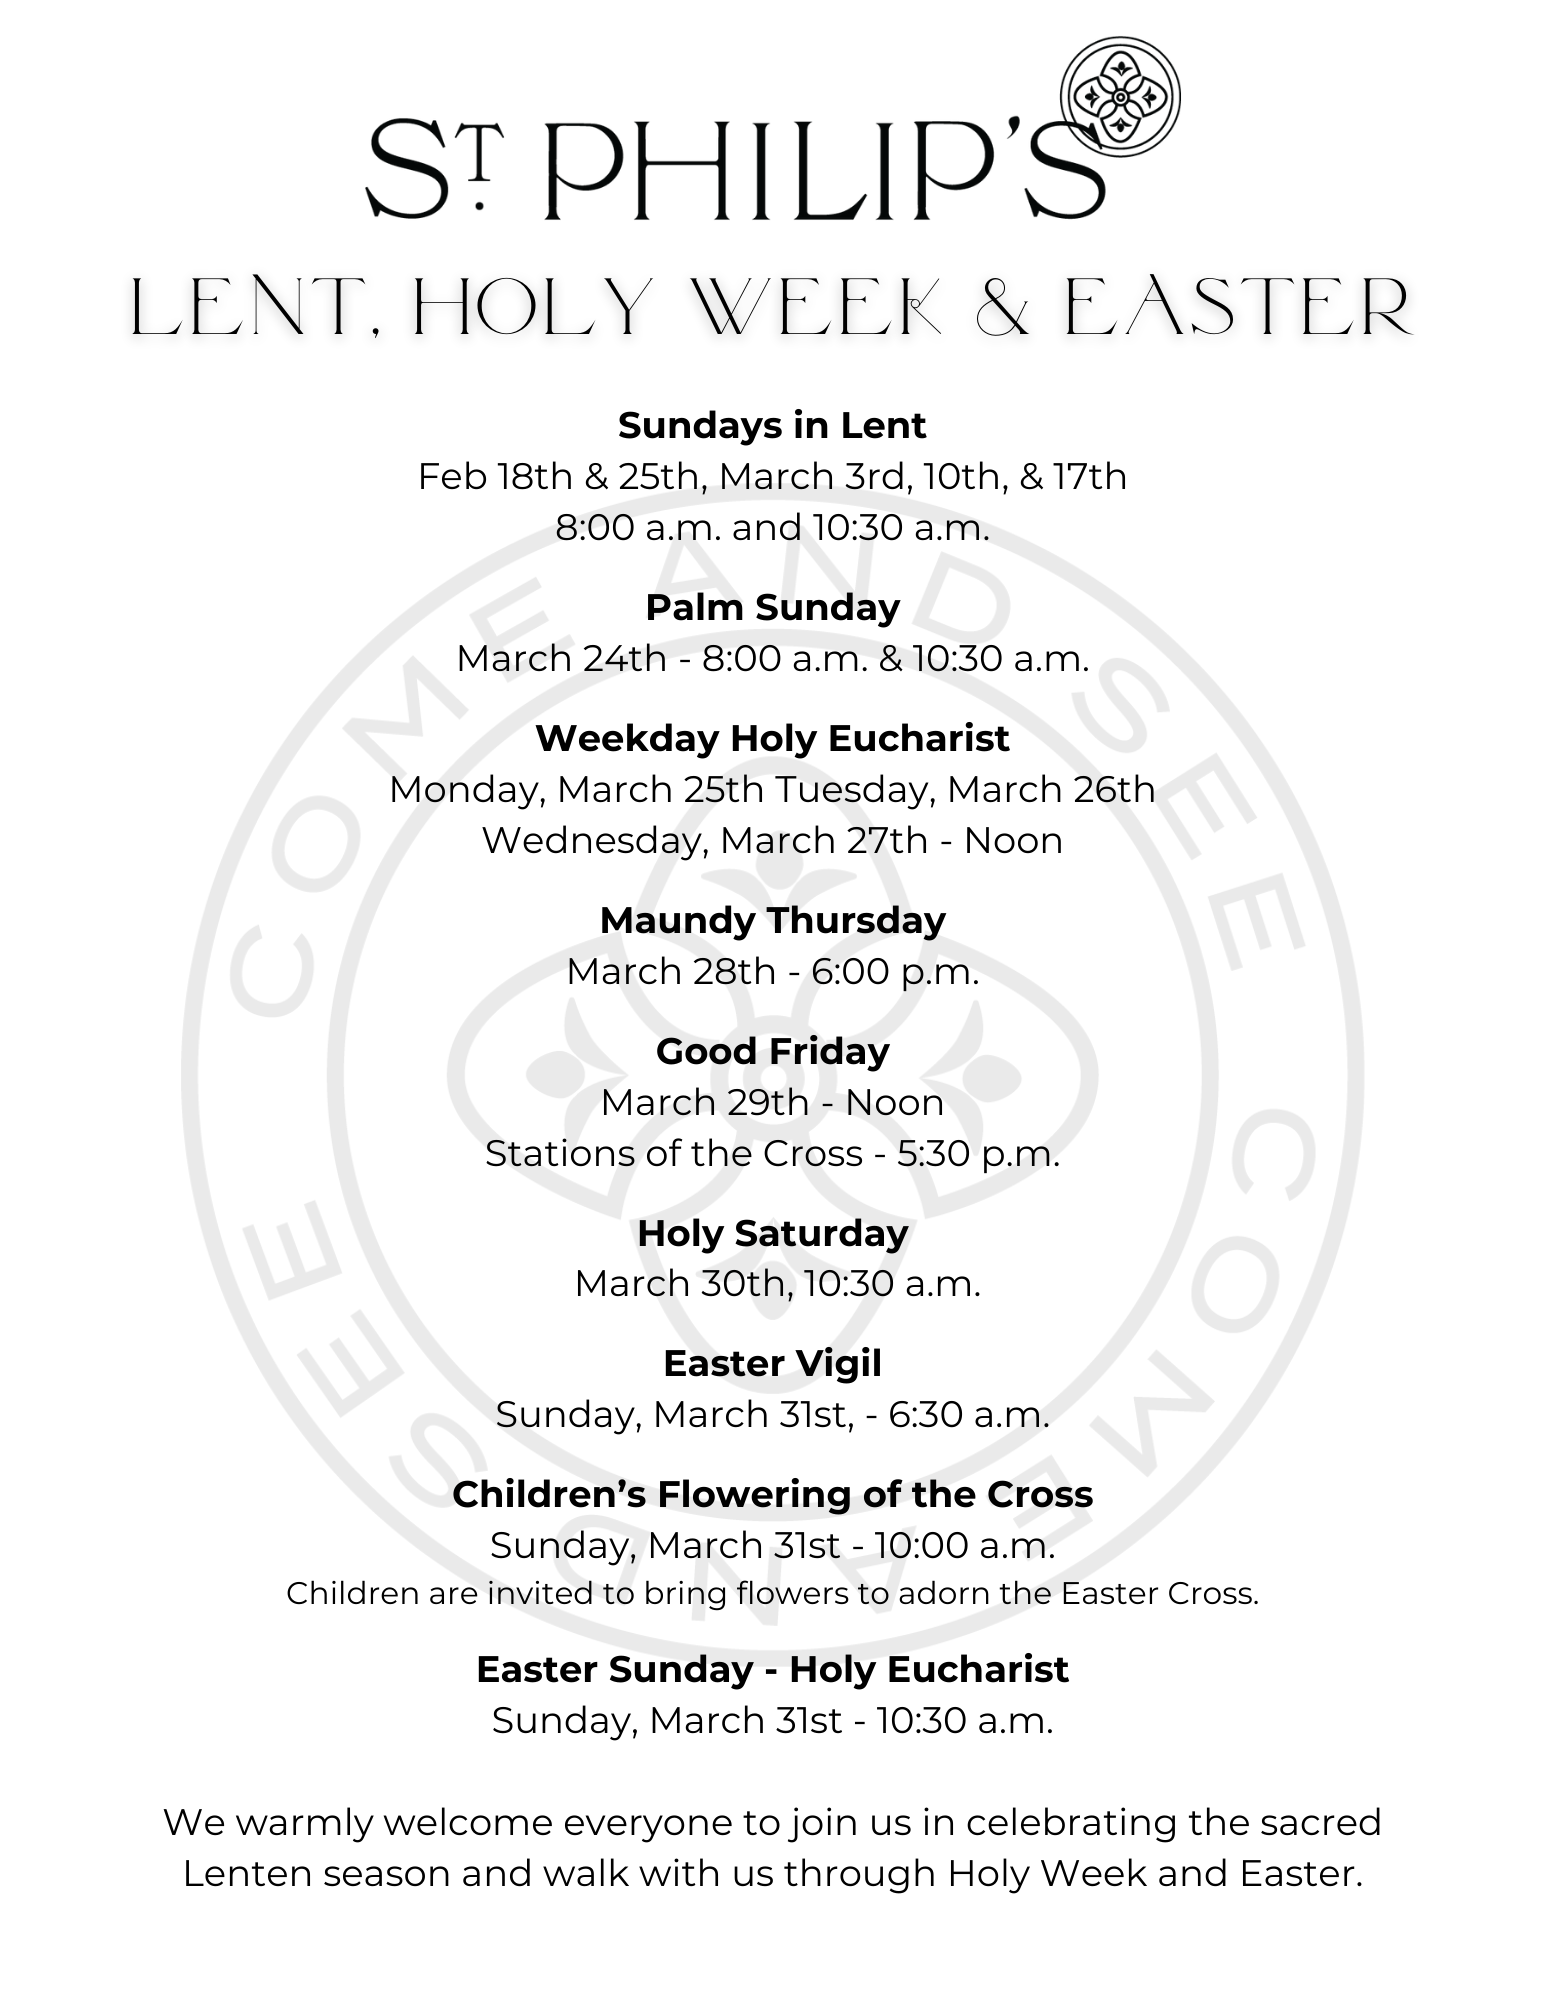 Lent, Holy Week And Easter Schedule